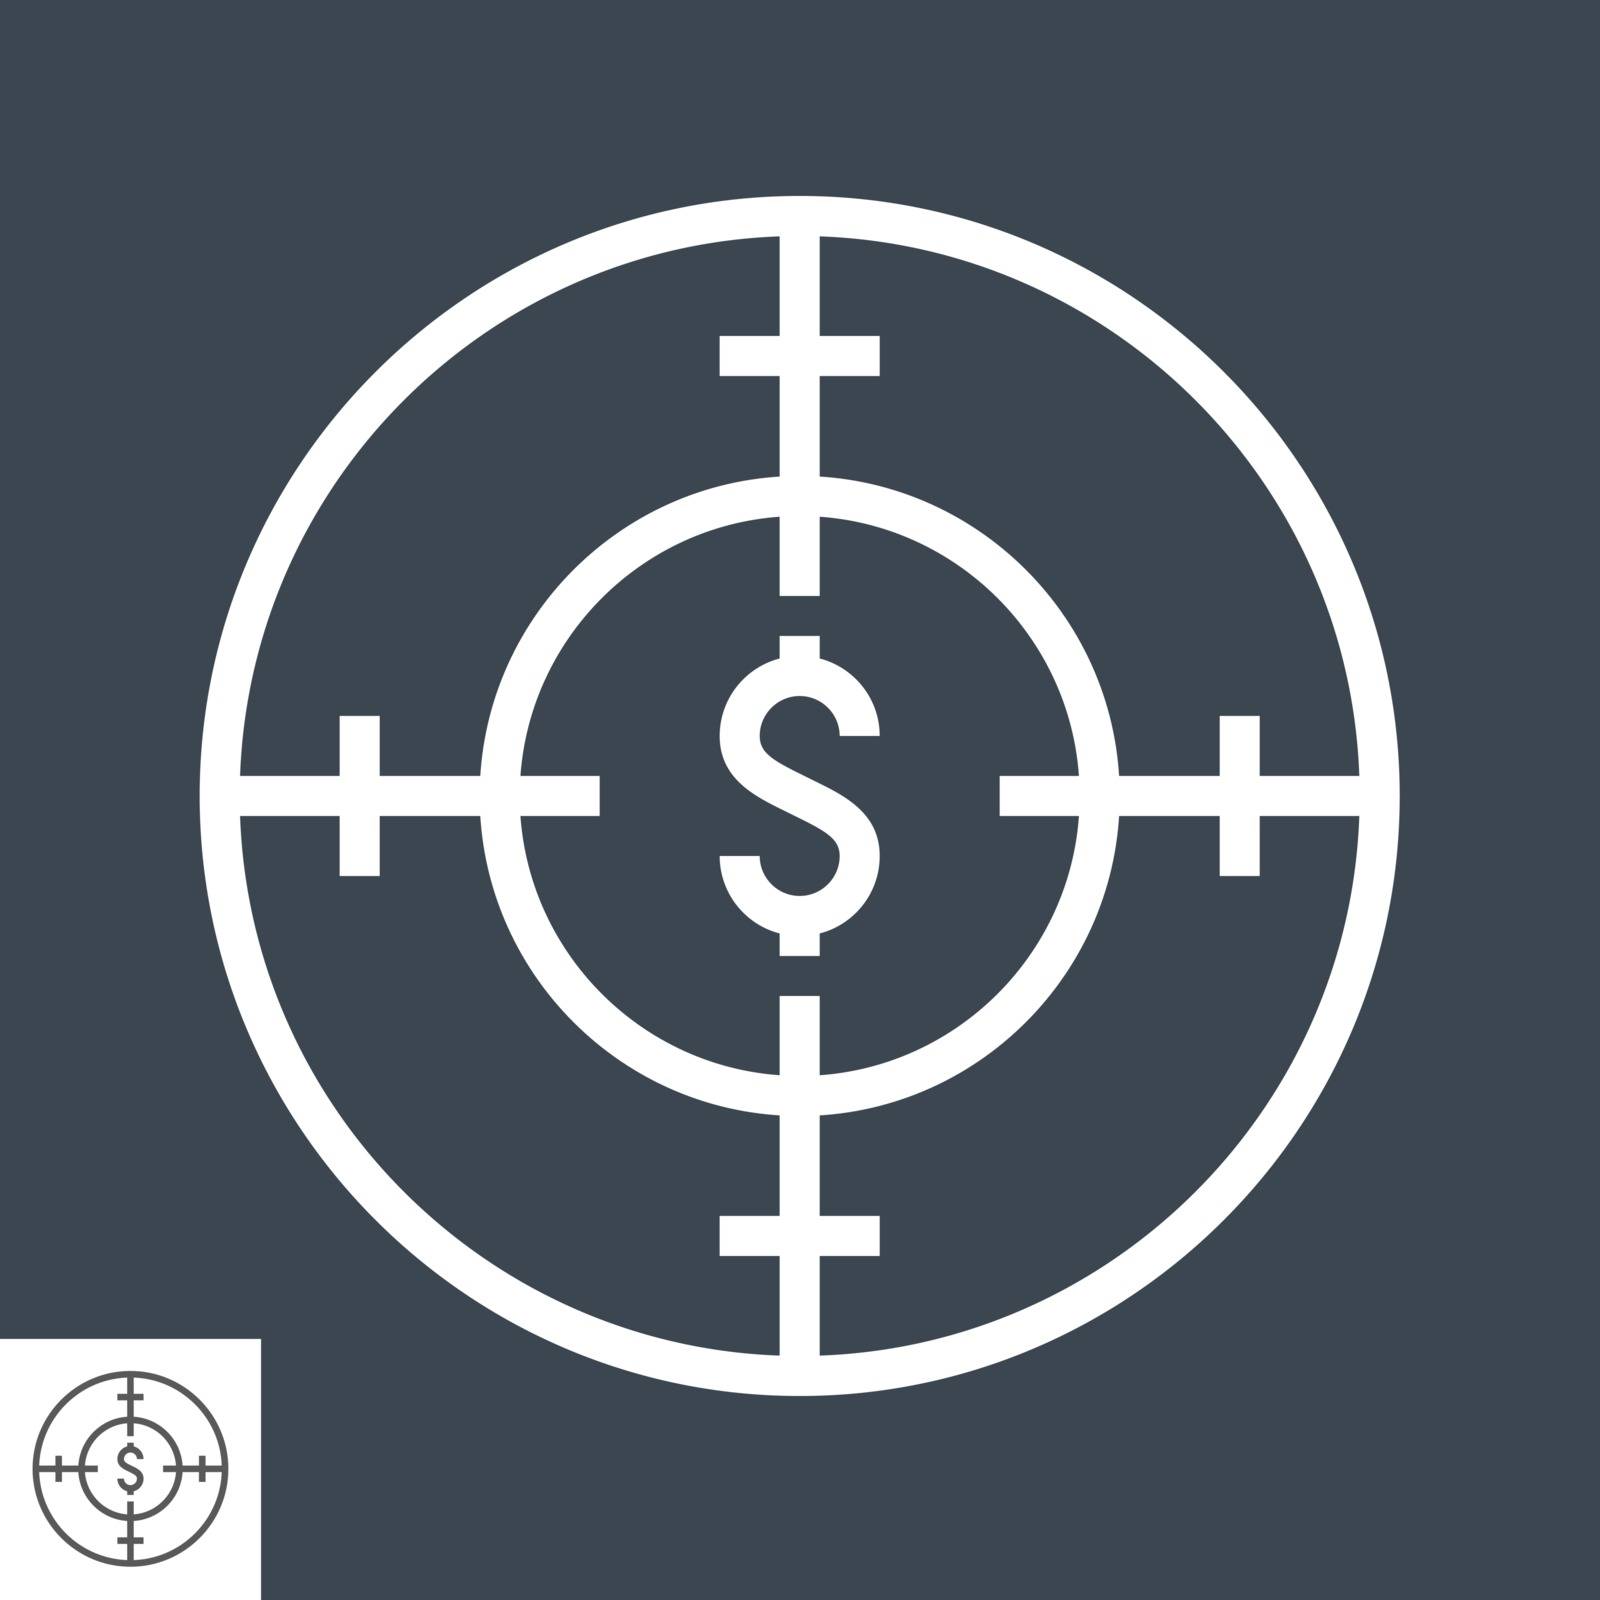 Funds Hunting Thin Line Vector Icon by smoki